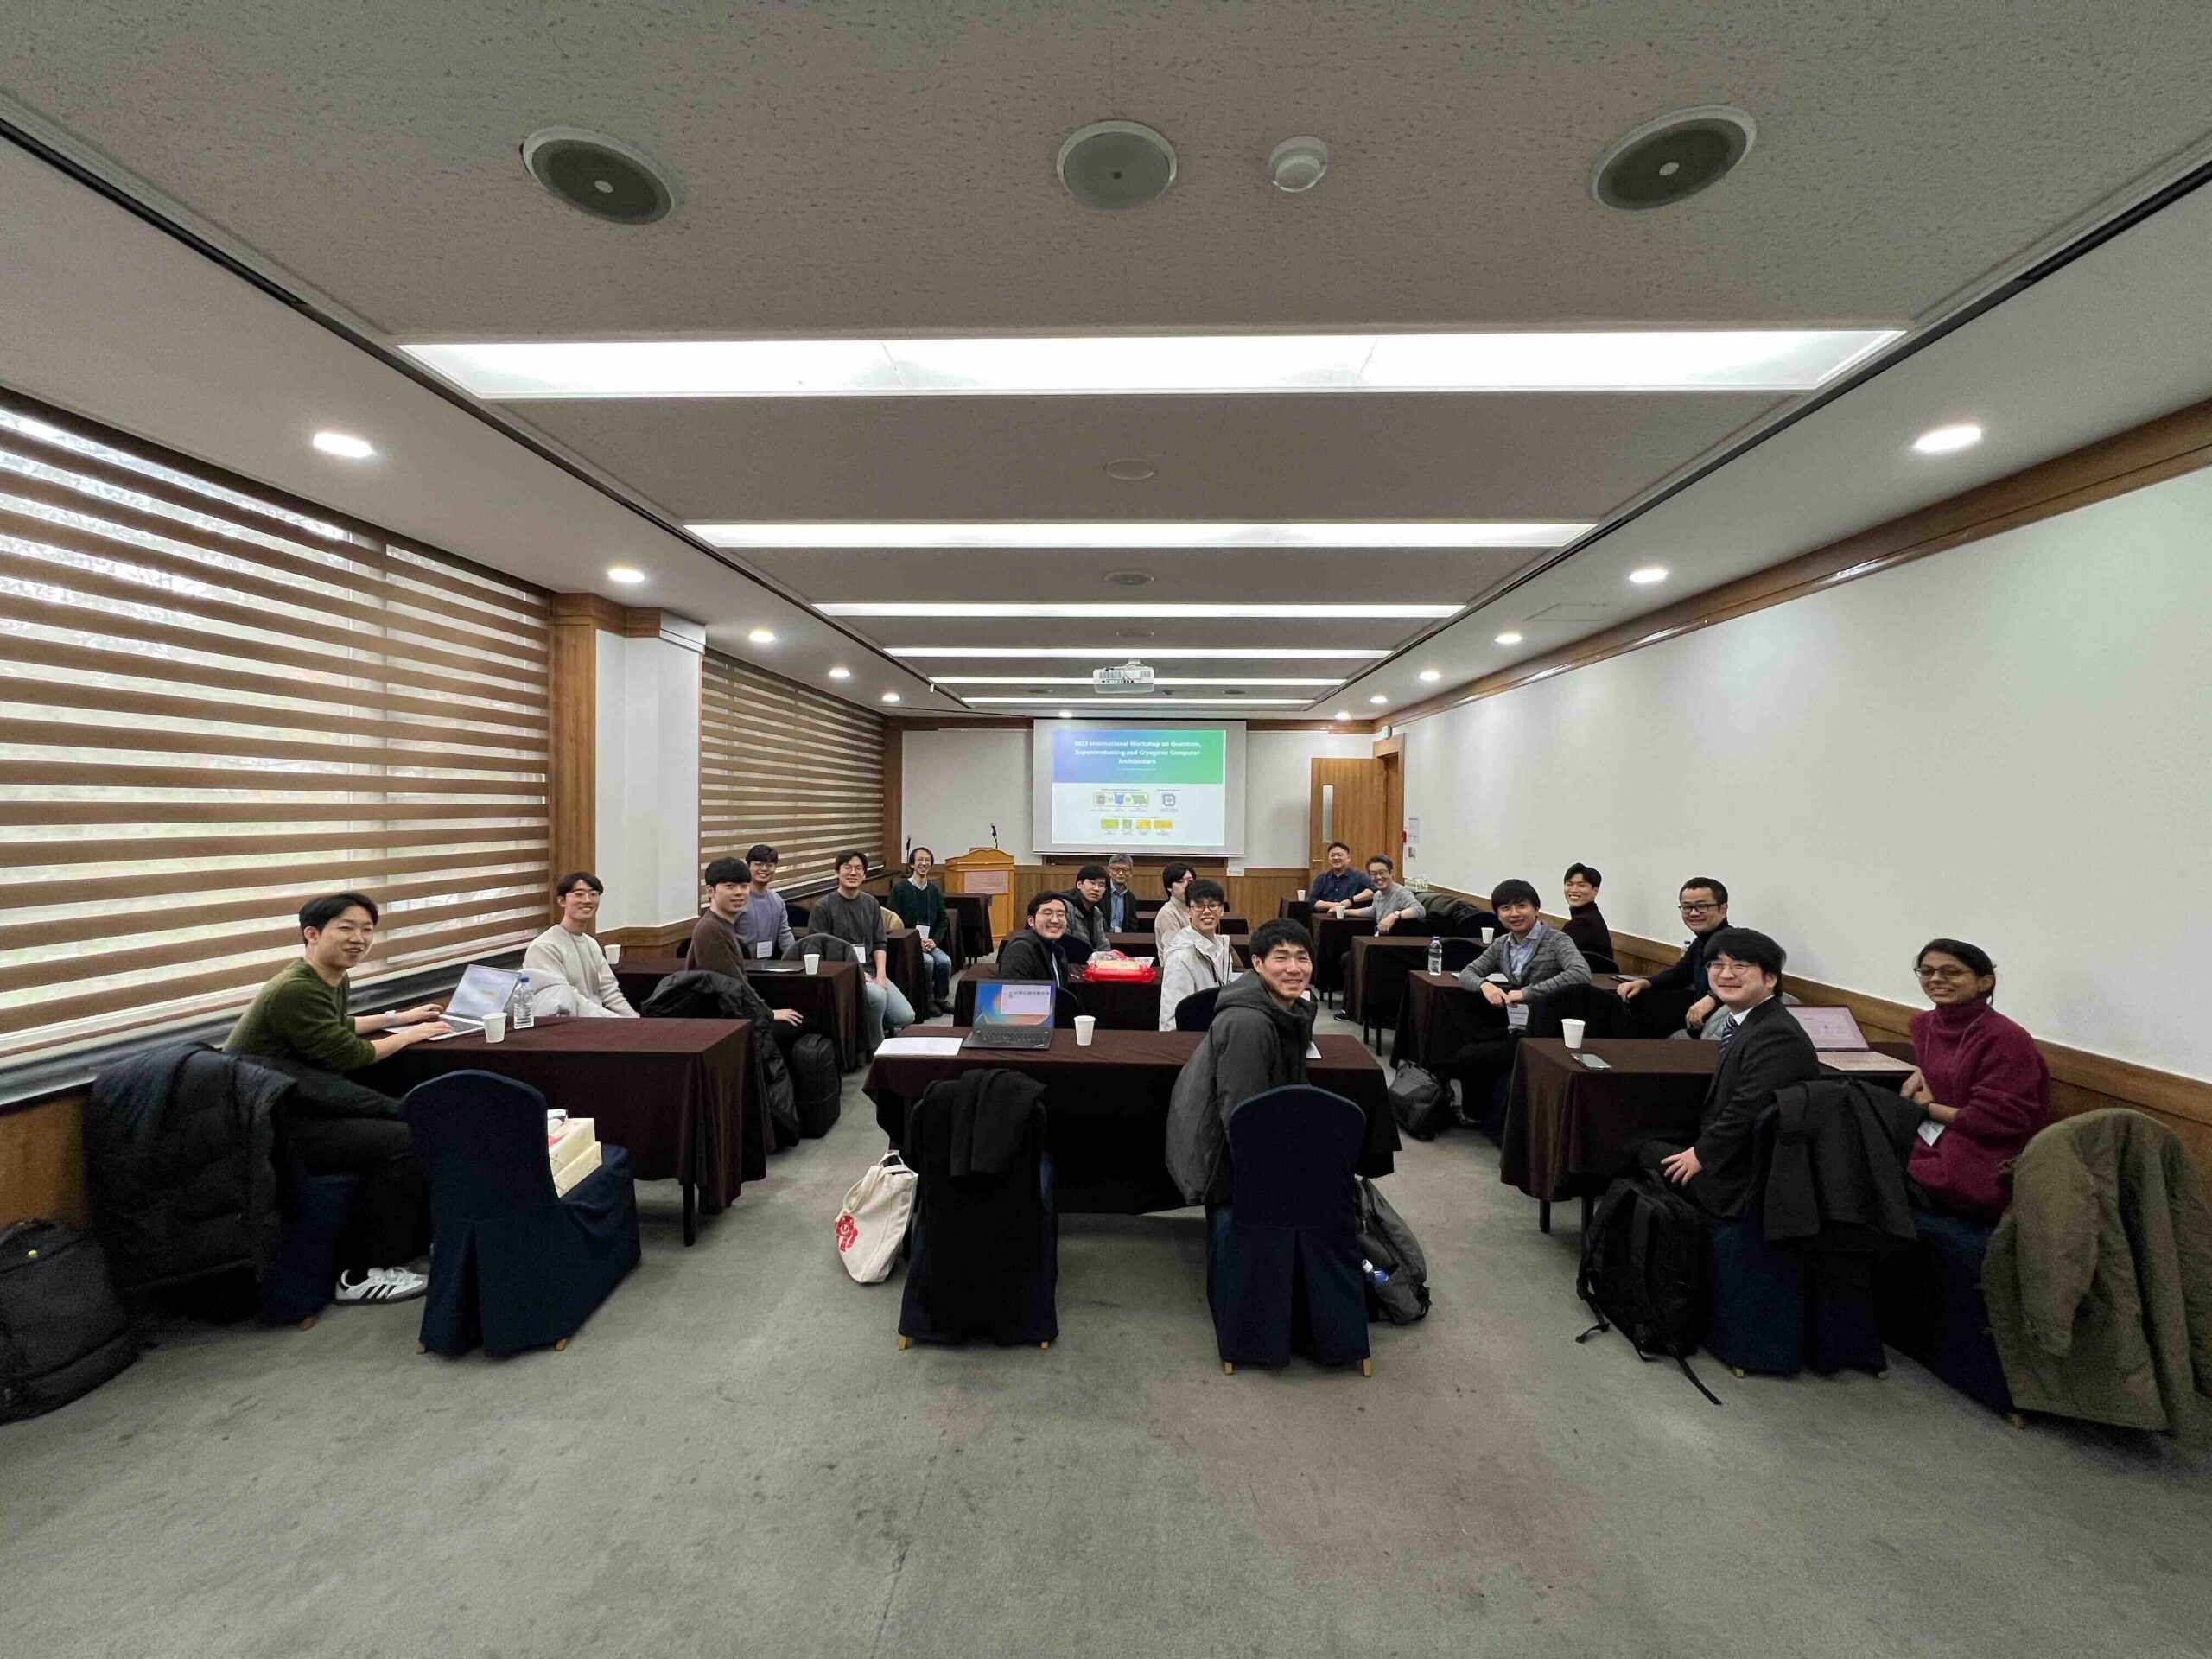 We visited the High Performance Computer System (HPCS) Lab. at Seoul National University and held a workshop on cryogenic computing and quantum computing! The students also had a technical exchange meeting with each other, making it a meaningful visit.